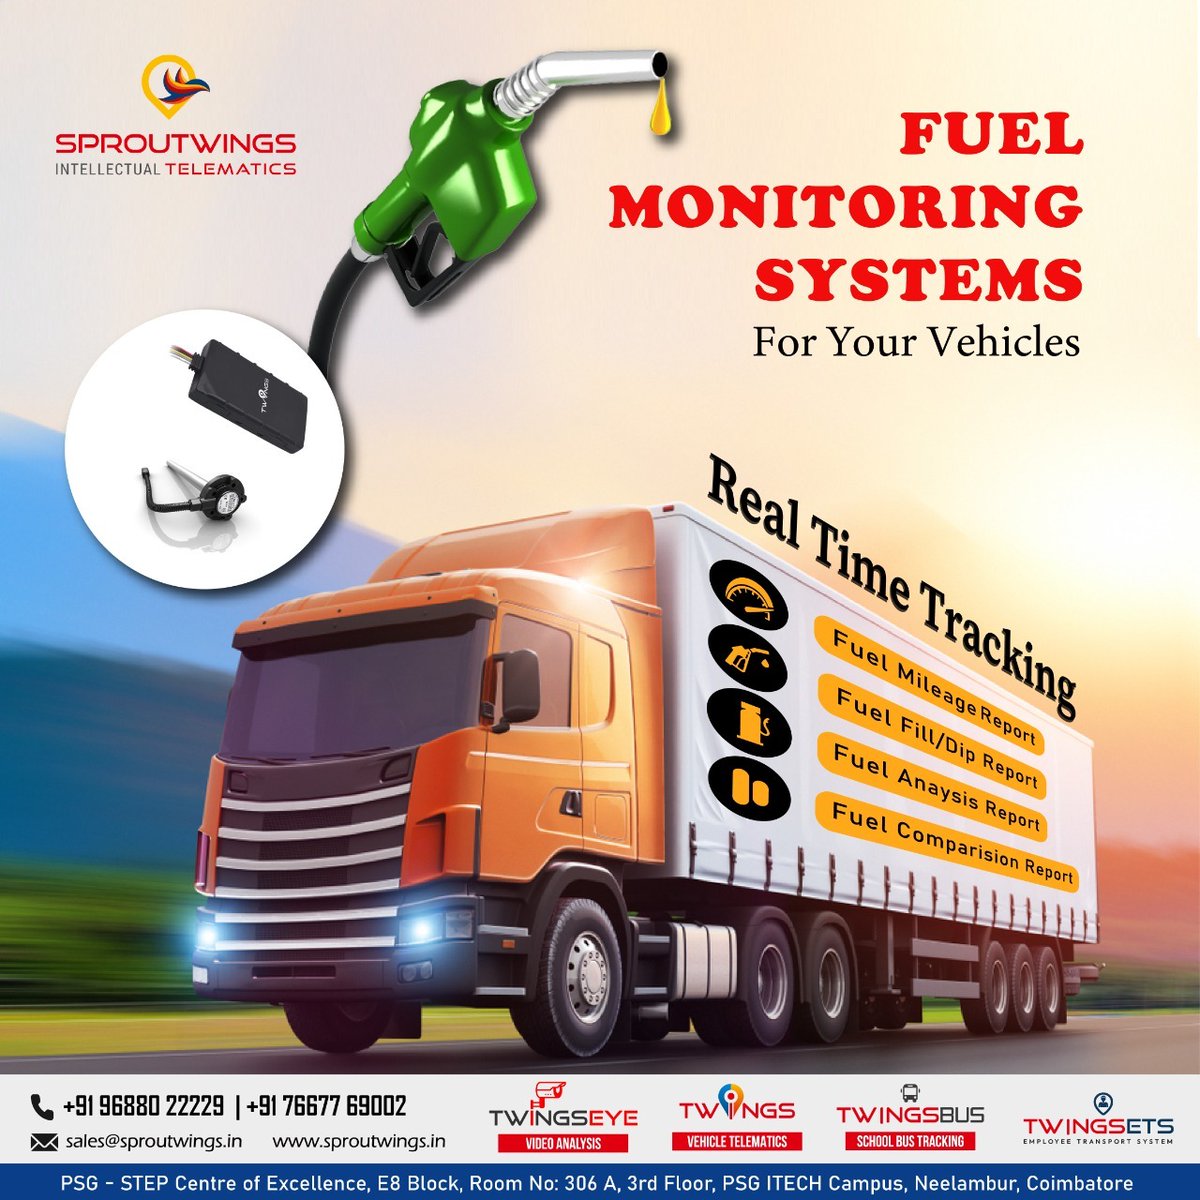 Real Time Tracking Fuel Monitoring System For Your Vehicle,
Specifications:
⛽ Fuel Mileage Report
⛽ Fuel fill/Dip Report
⛽ Fuel Analysis Report
⛽ Fuel Comparison Report

For Contact : +91 9688022229 / +91 7667769002

#fuelmonitoringsystem #sproutwingsintellectualtelematics